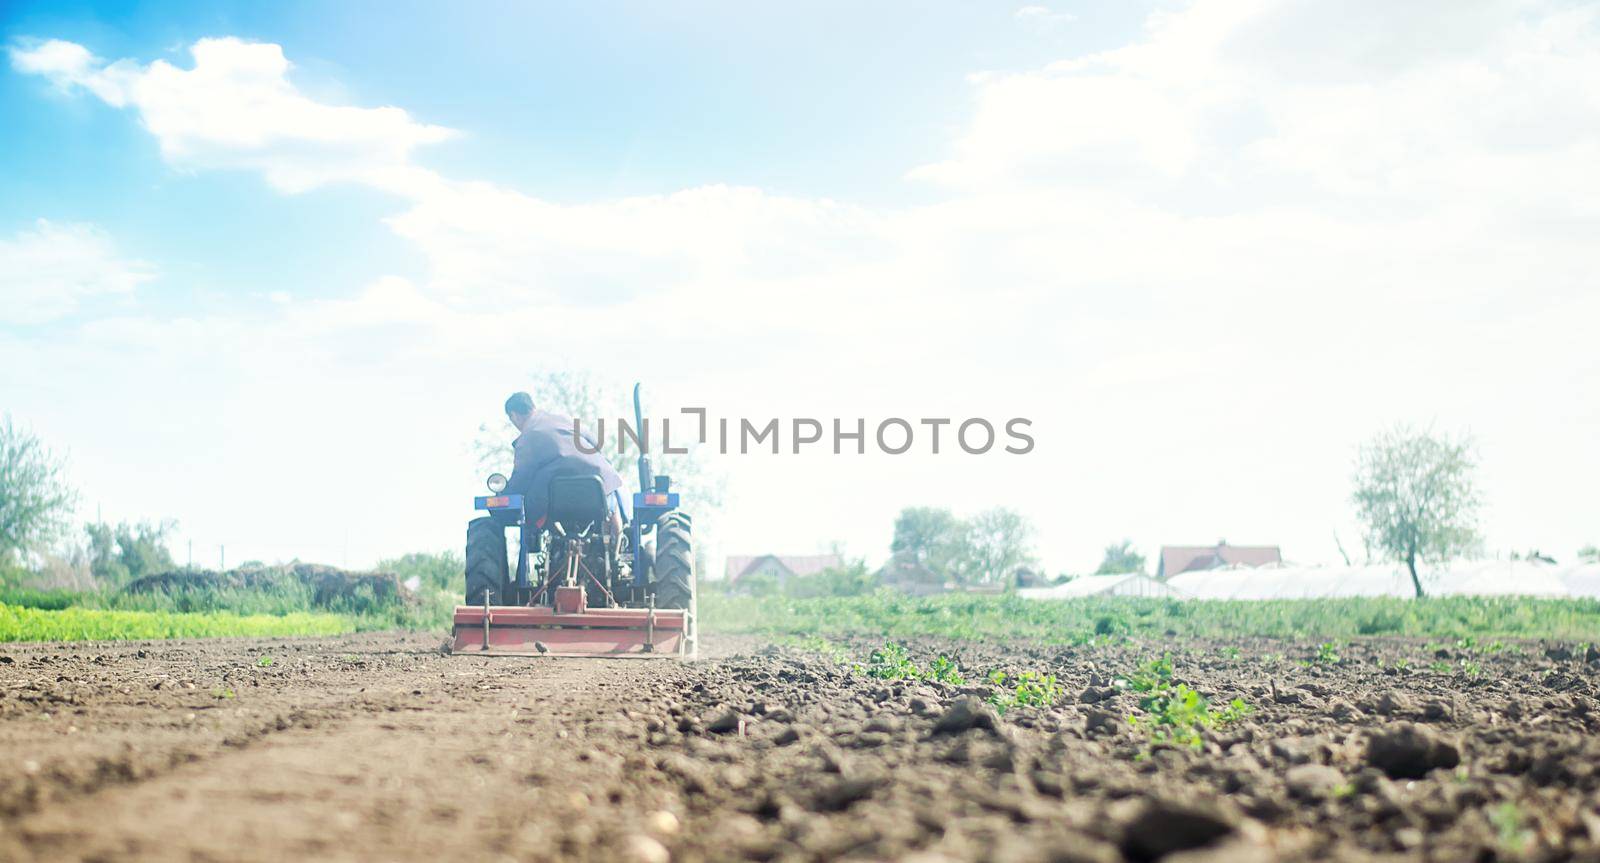 Farmer on a tractor with milling machine loosens, grinds and mixes soil. Farming and agriculture. Loosening the surface, cultivating the land for further planting. Cultivation technology equipment by iLixe48